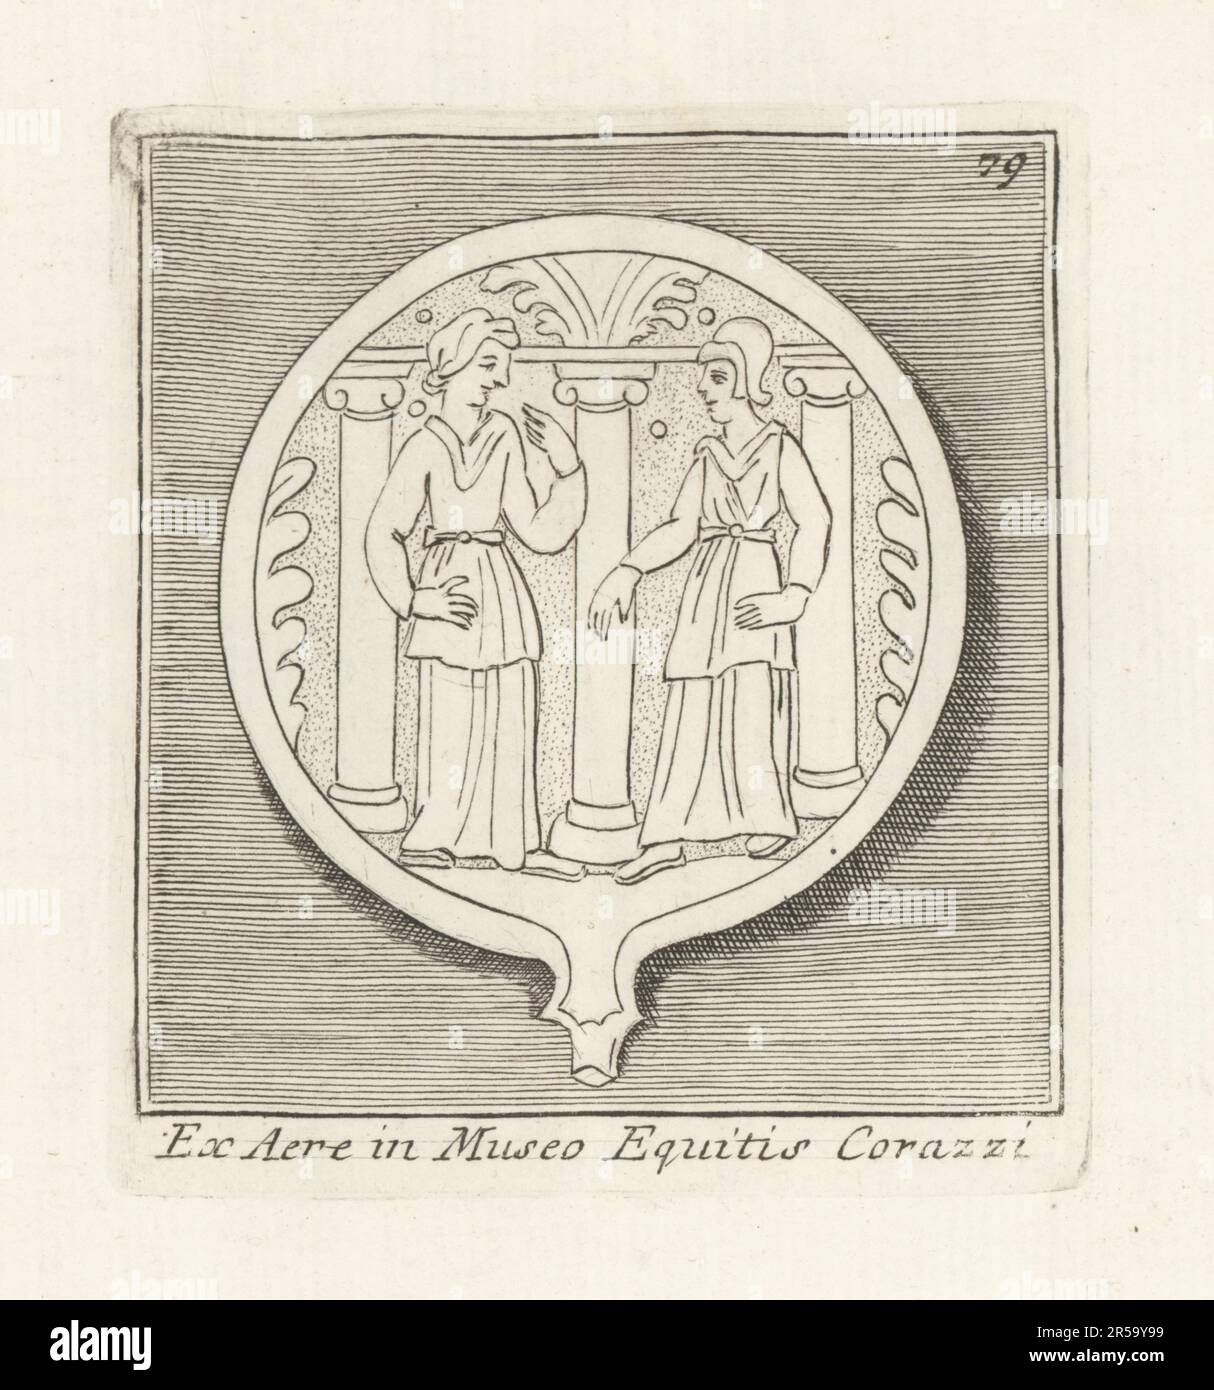 Two women in conversation in front of a proscenium with Ionic columns. A scene from a theatre play. From a bronze Etruscan bowl in the Museum of the Knights of the Order of Saint Stephen, Cortona. Patera aerea Etrusca. in Museo Equitis Corazzi. Copperplate engraving from Francesco Valesio, Antonio Gori and Ridolfino Venuti’s Academia Etrusca, Museum Cortonense in quo Vetera Monumenta, (Etruscan Academy or Museum of Cortona), Faustus Amideus, Rome, 1750. Stock Photo